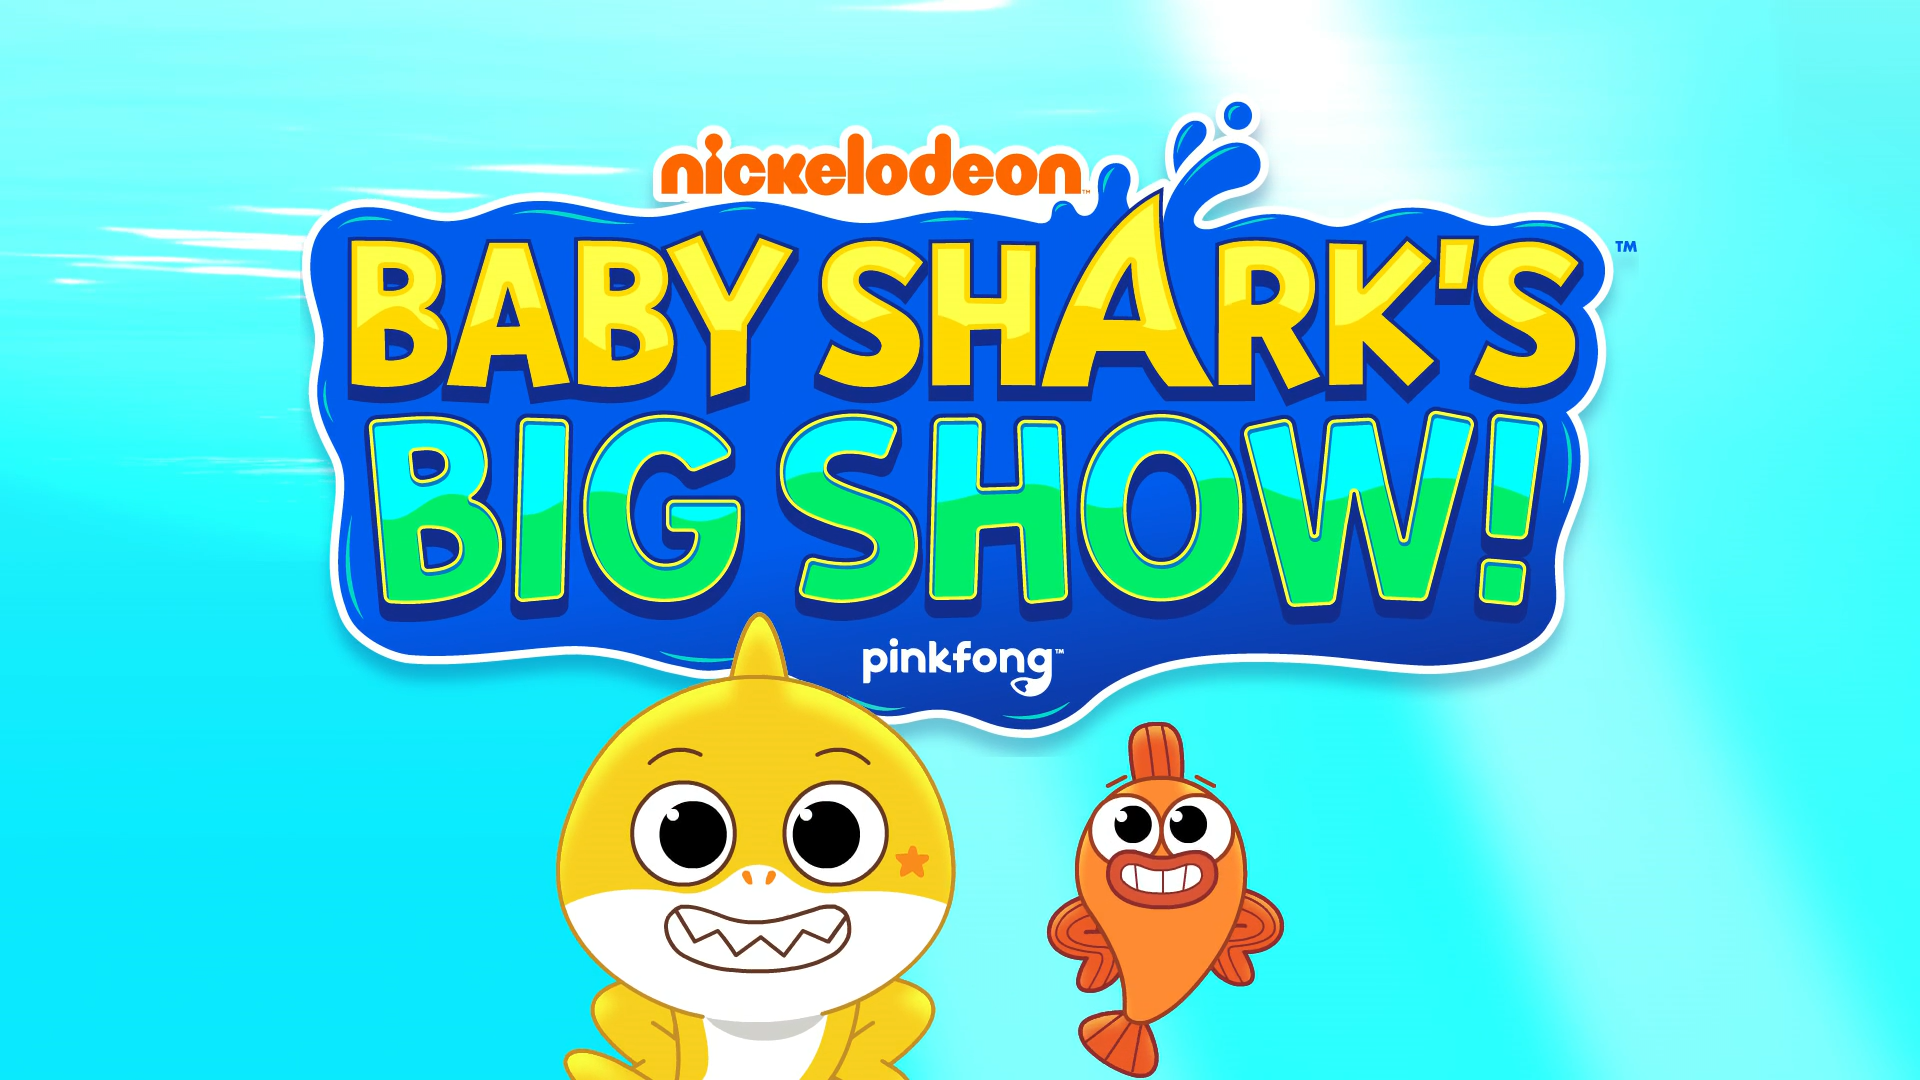 https://static.wikia.nocookie.net/nogginarchives/images/1/1d/Baby_Shark%27s_Big_Show%21_Title_Card.png/revision/latest?cb=20230430094525